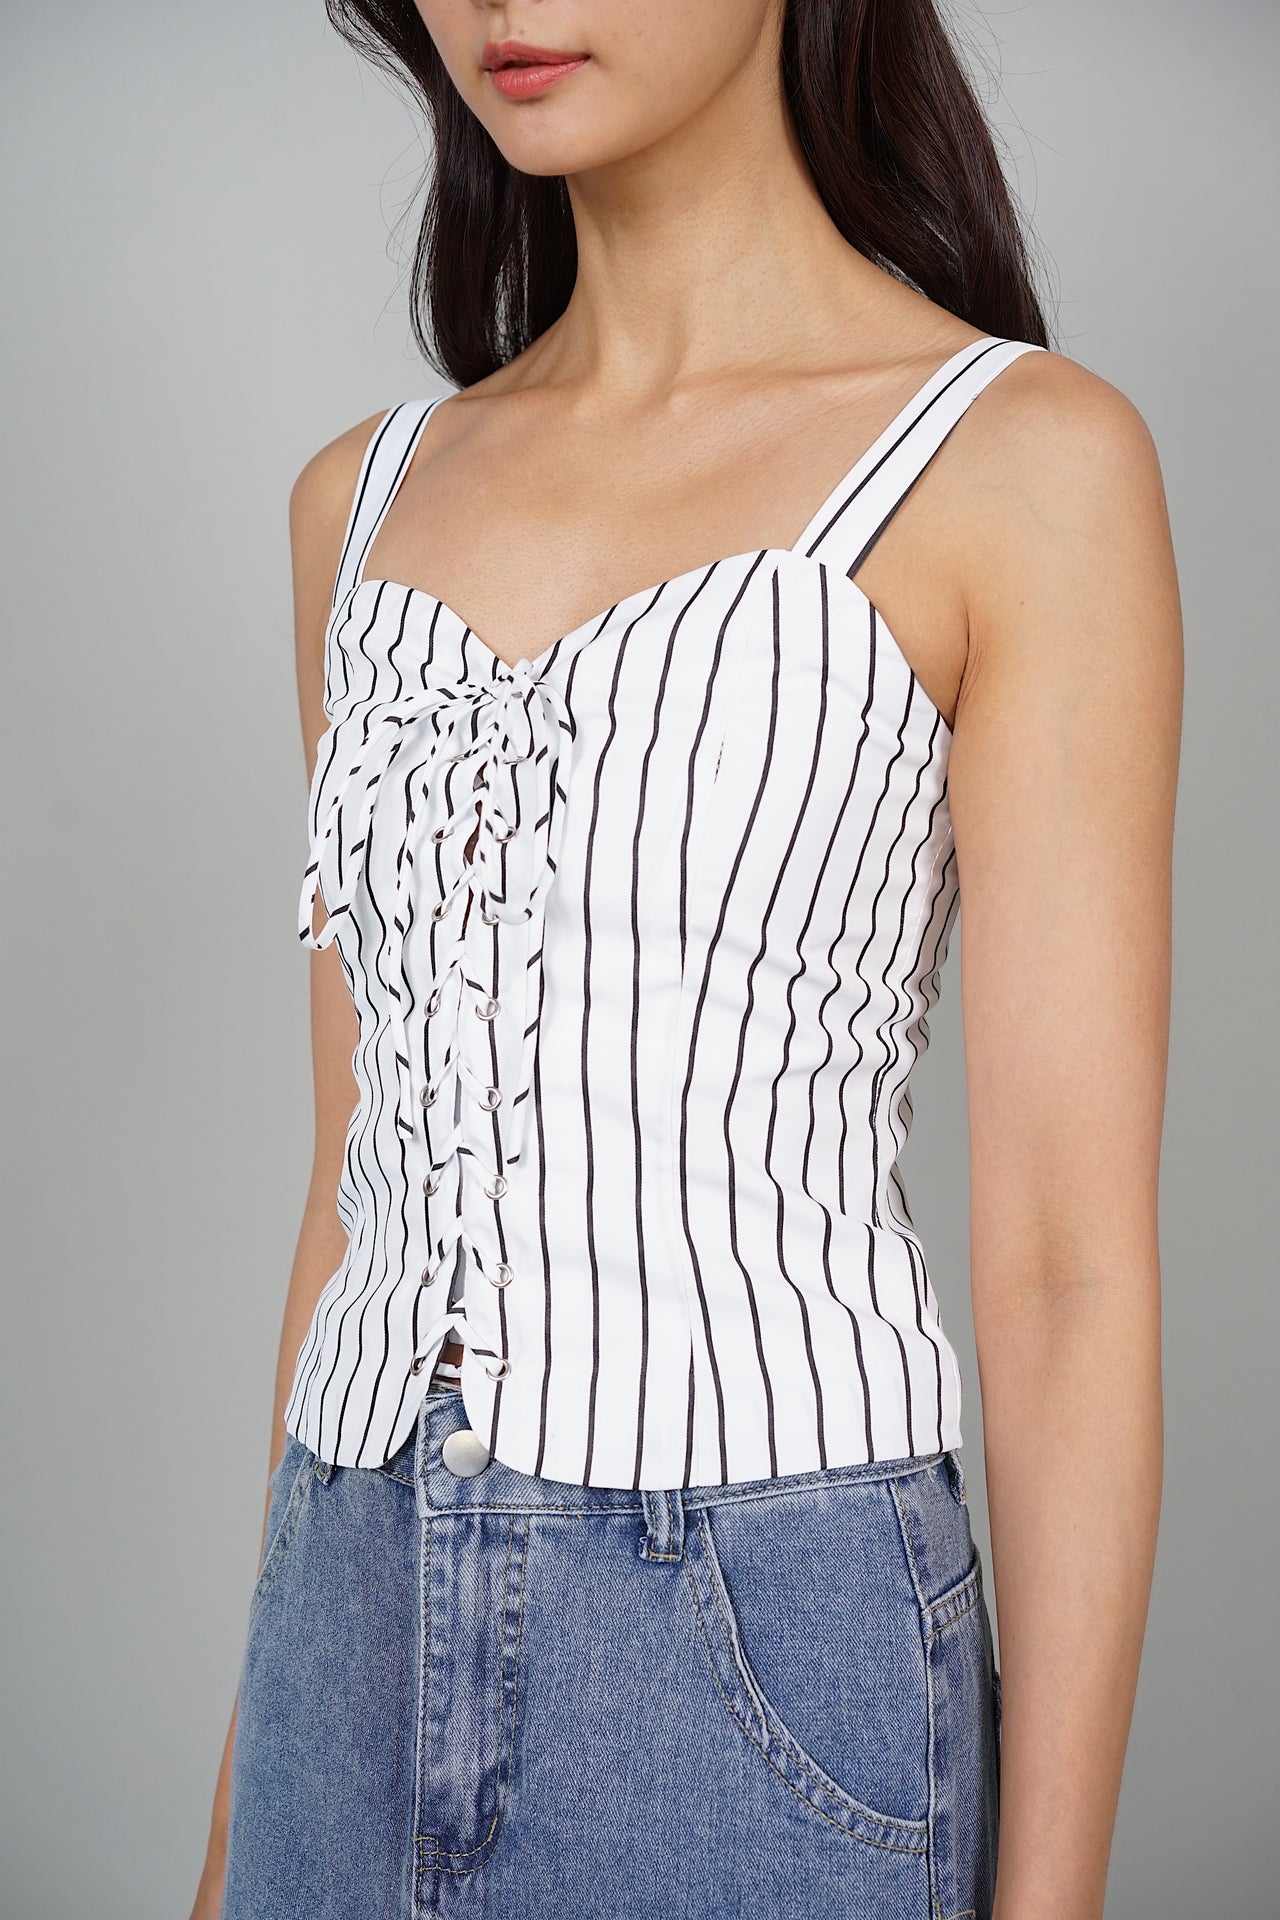 Selvi Lace-Up Top in White Stripes